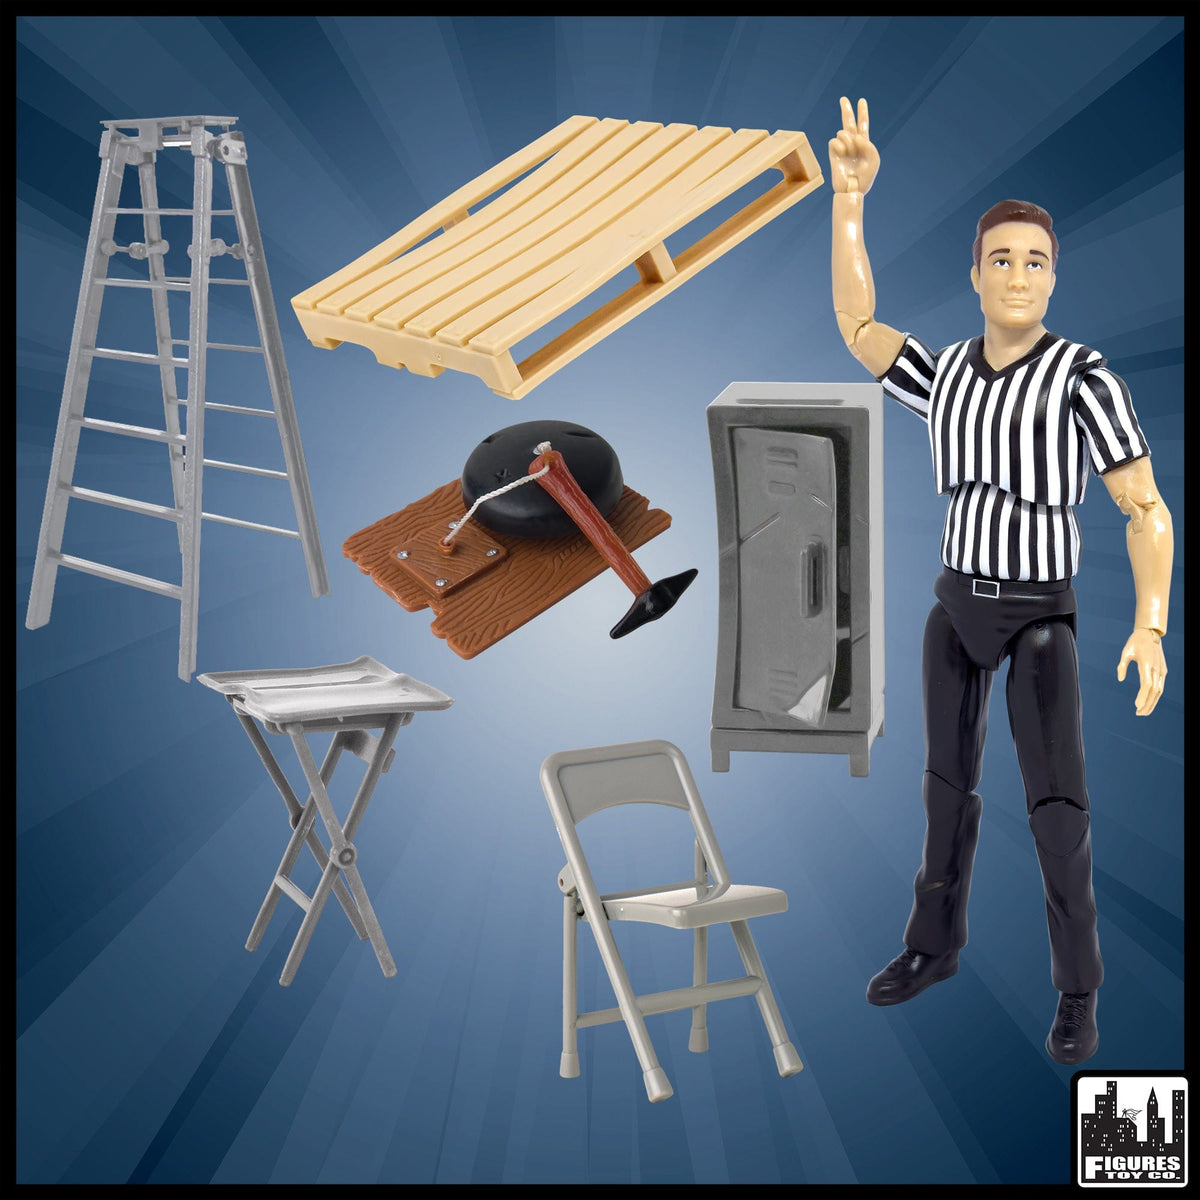 Wrestling Ring Referee &amp; Gear Accessory Kit for WWE Wrestling Action Figures